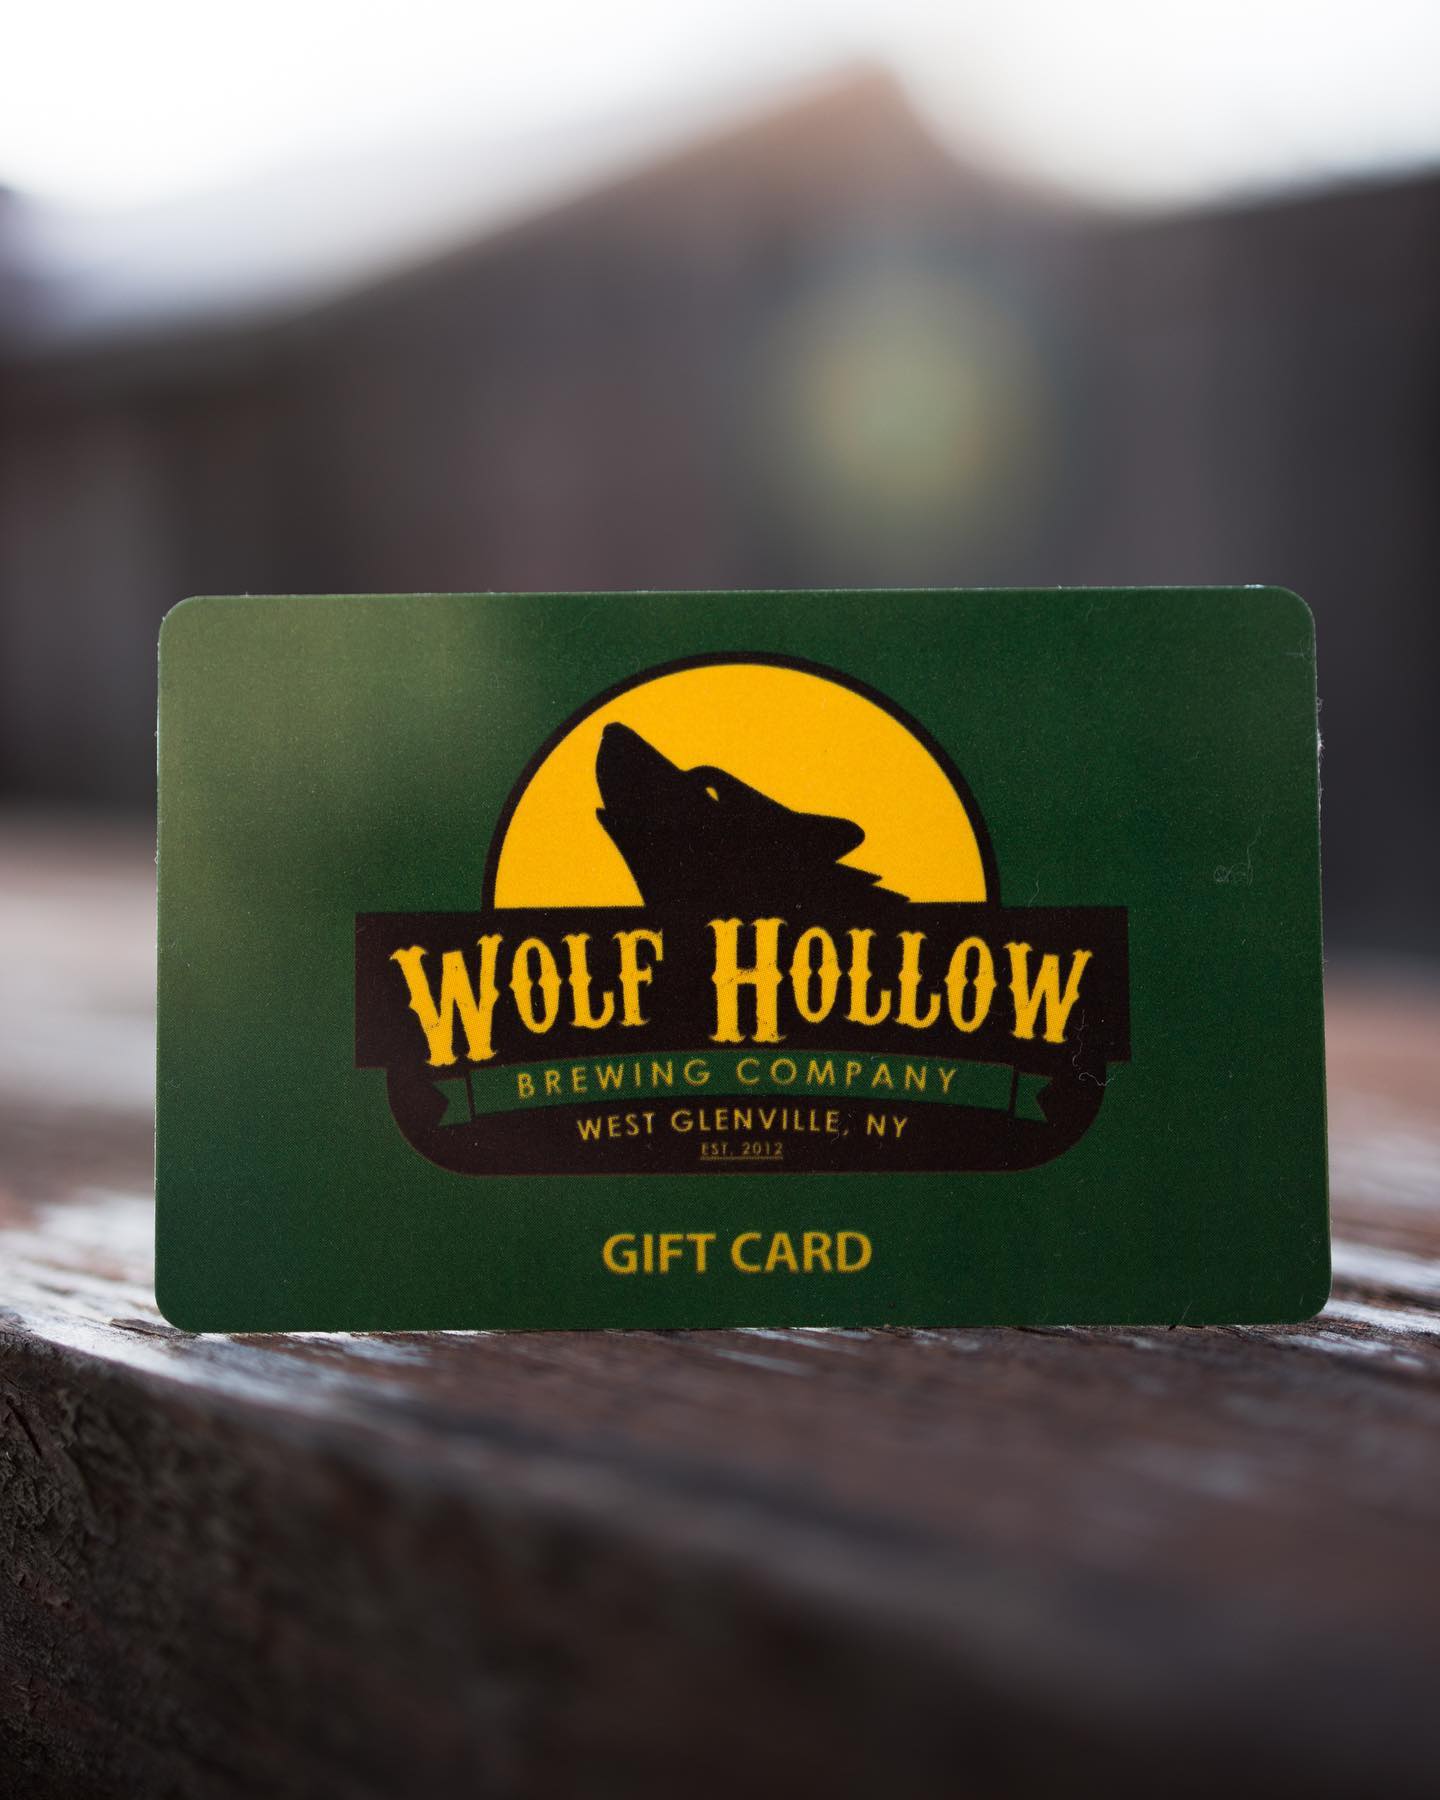 Gift Cards and Pick-up Services